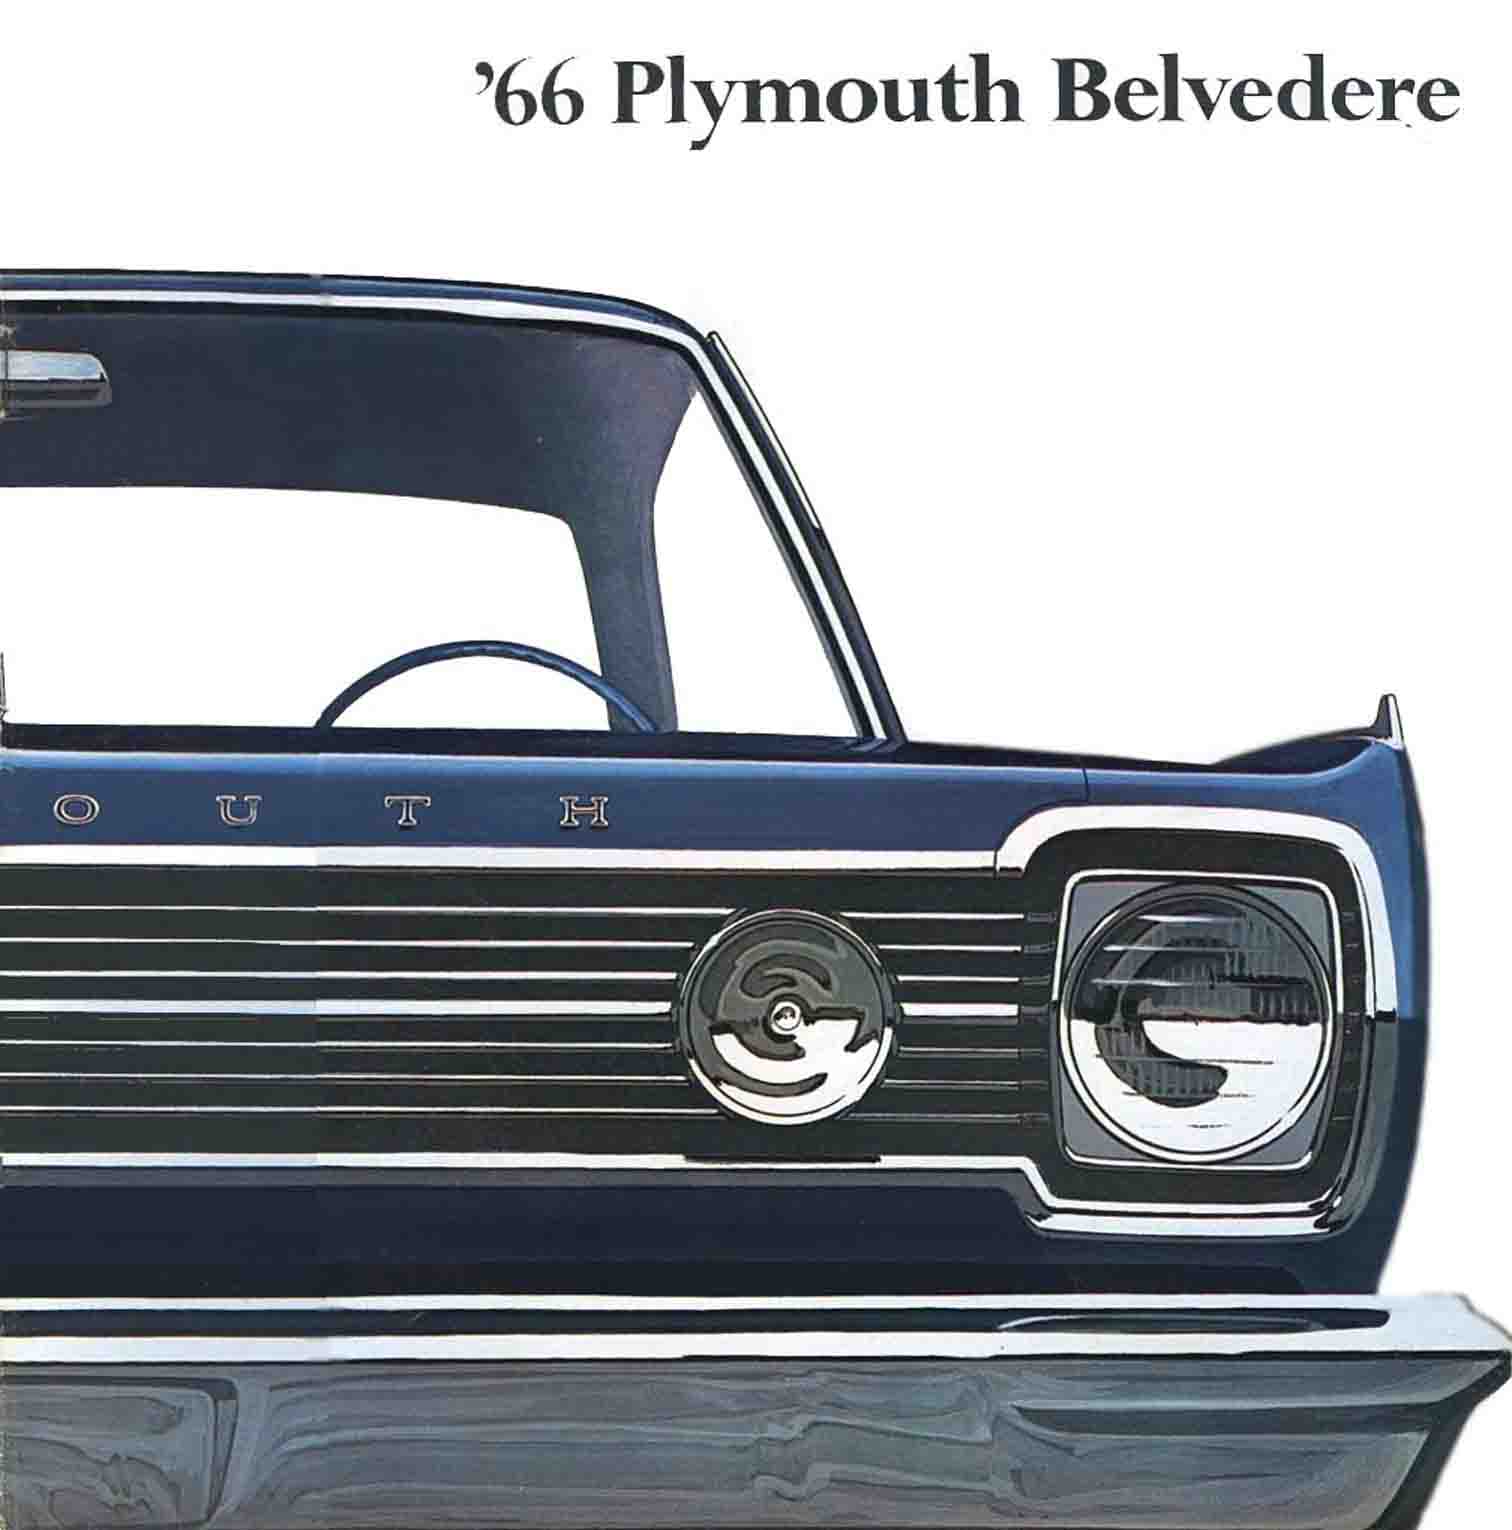 1966_Plymouth_Belvedere-01